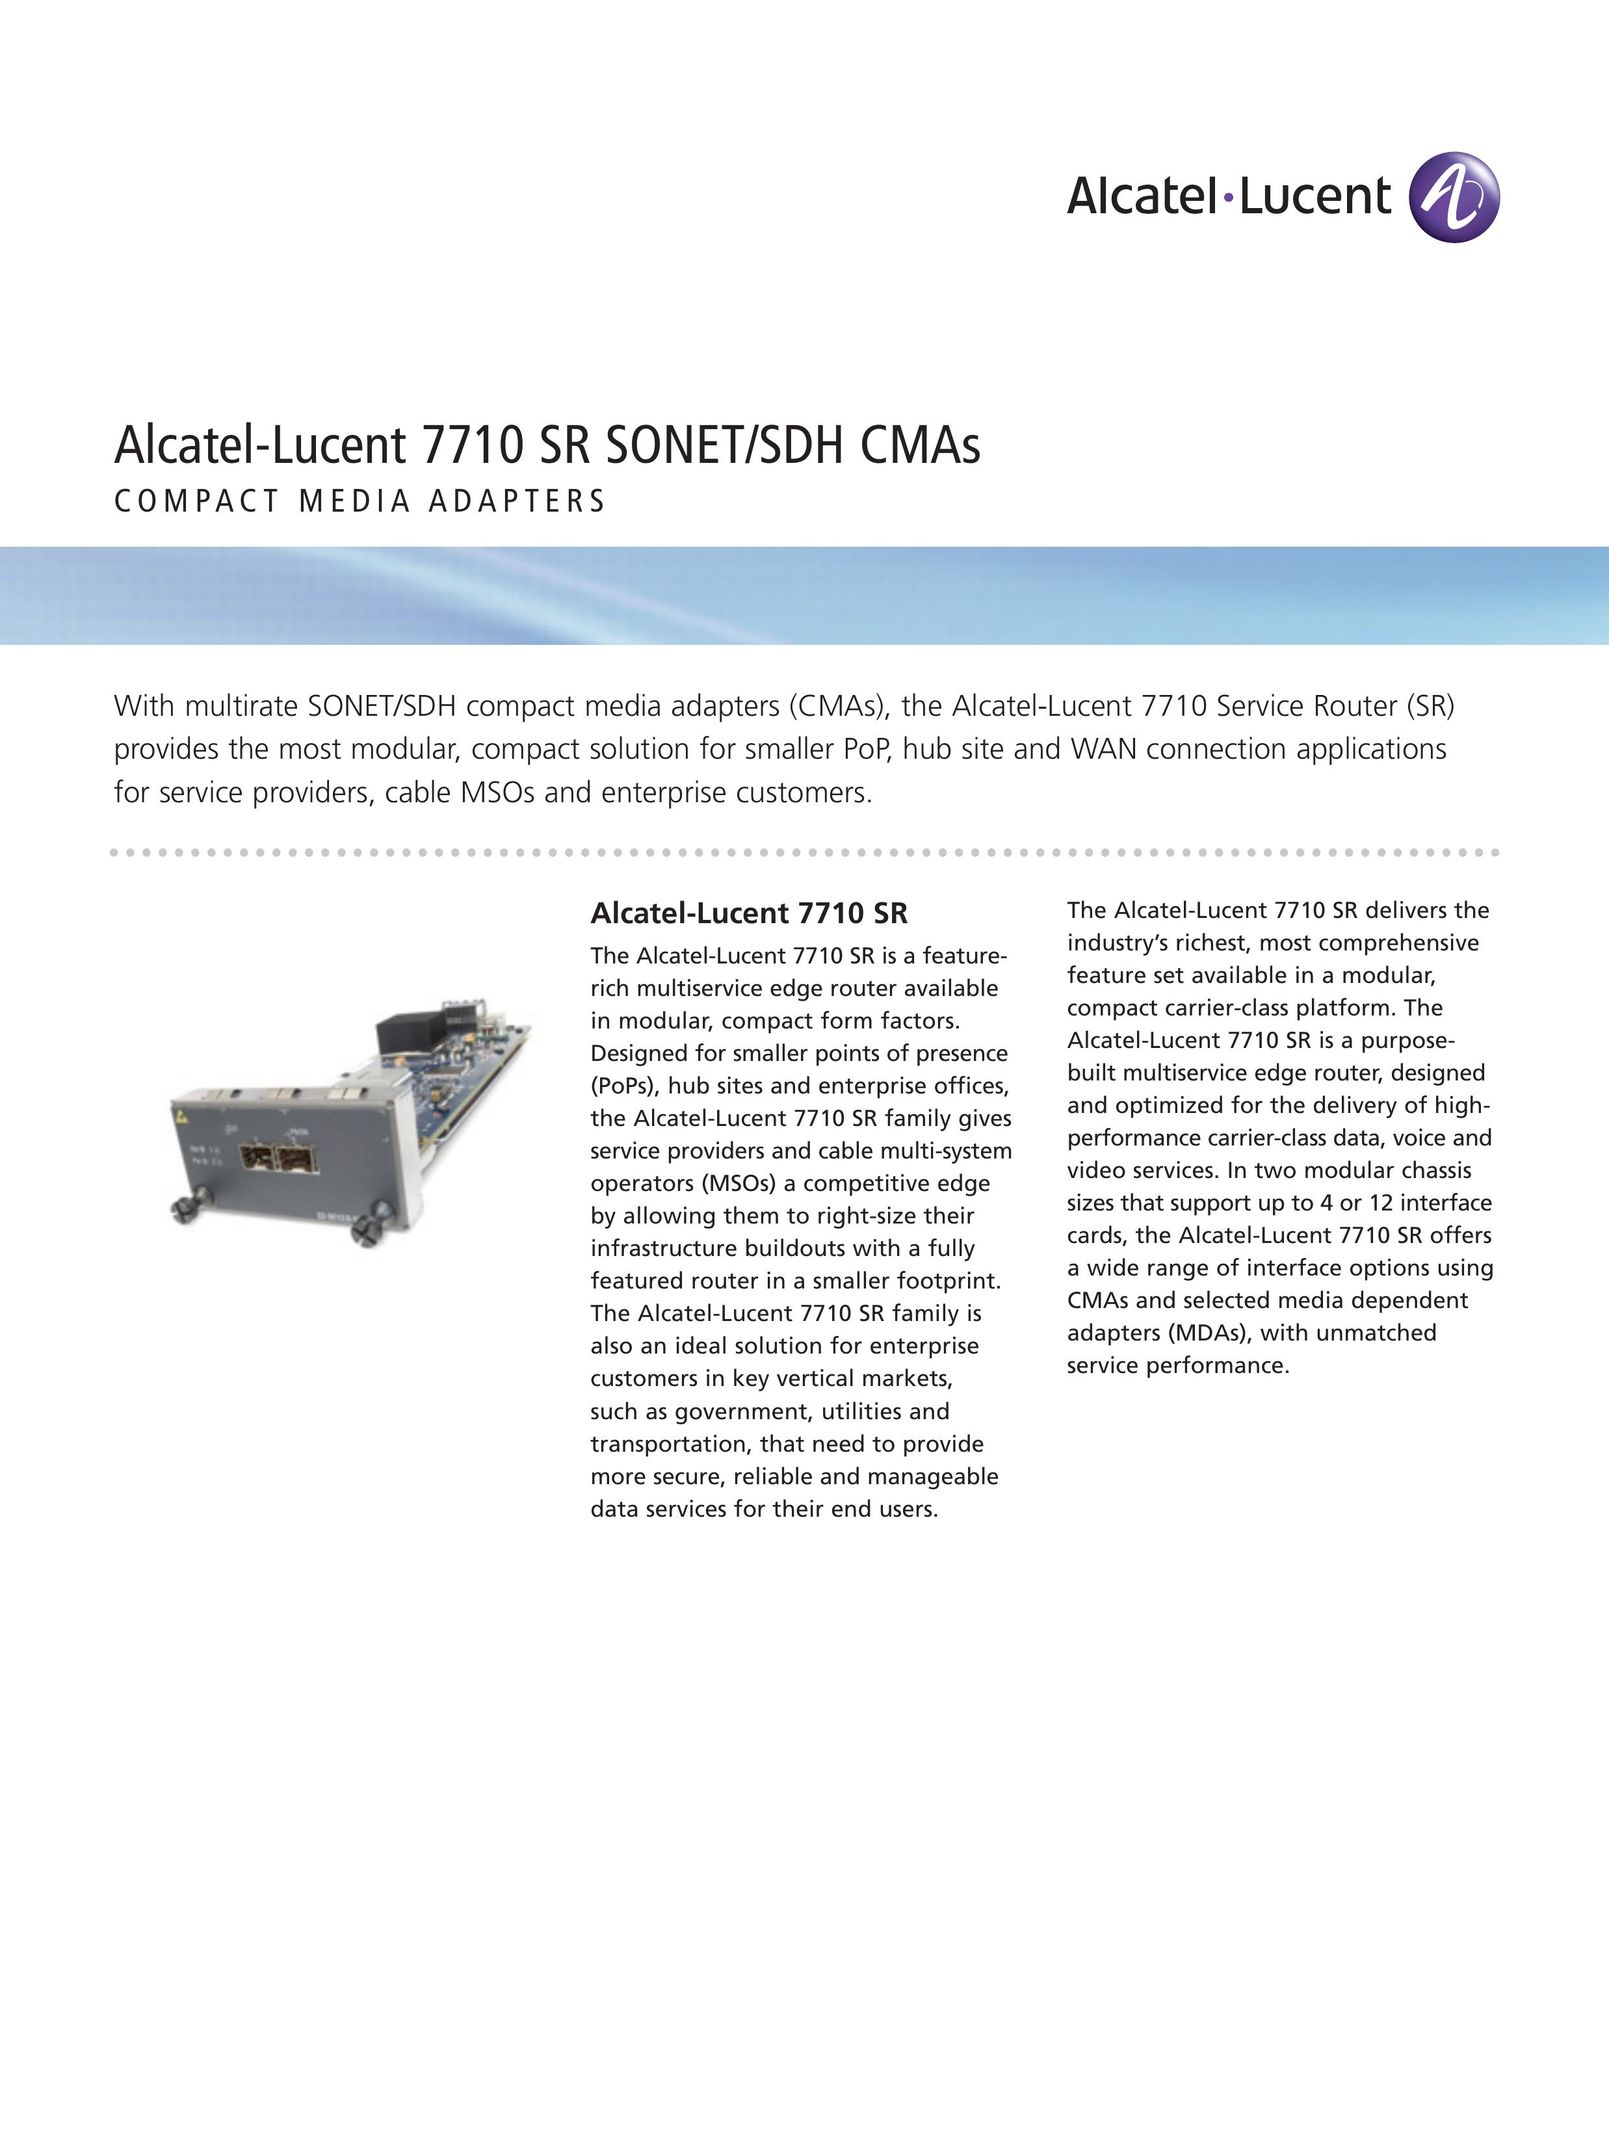 Alcatel-Lucent 7710 SDH CMAs Network Card User Manual